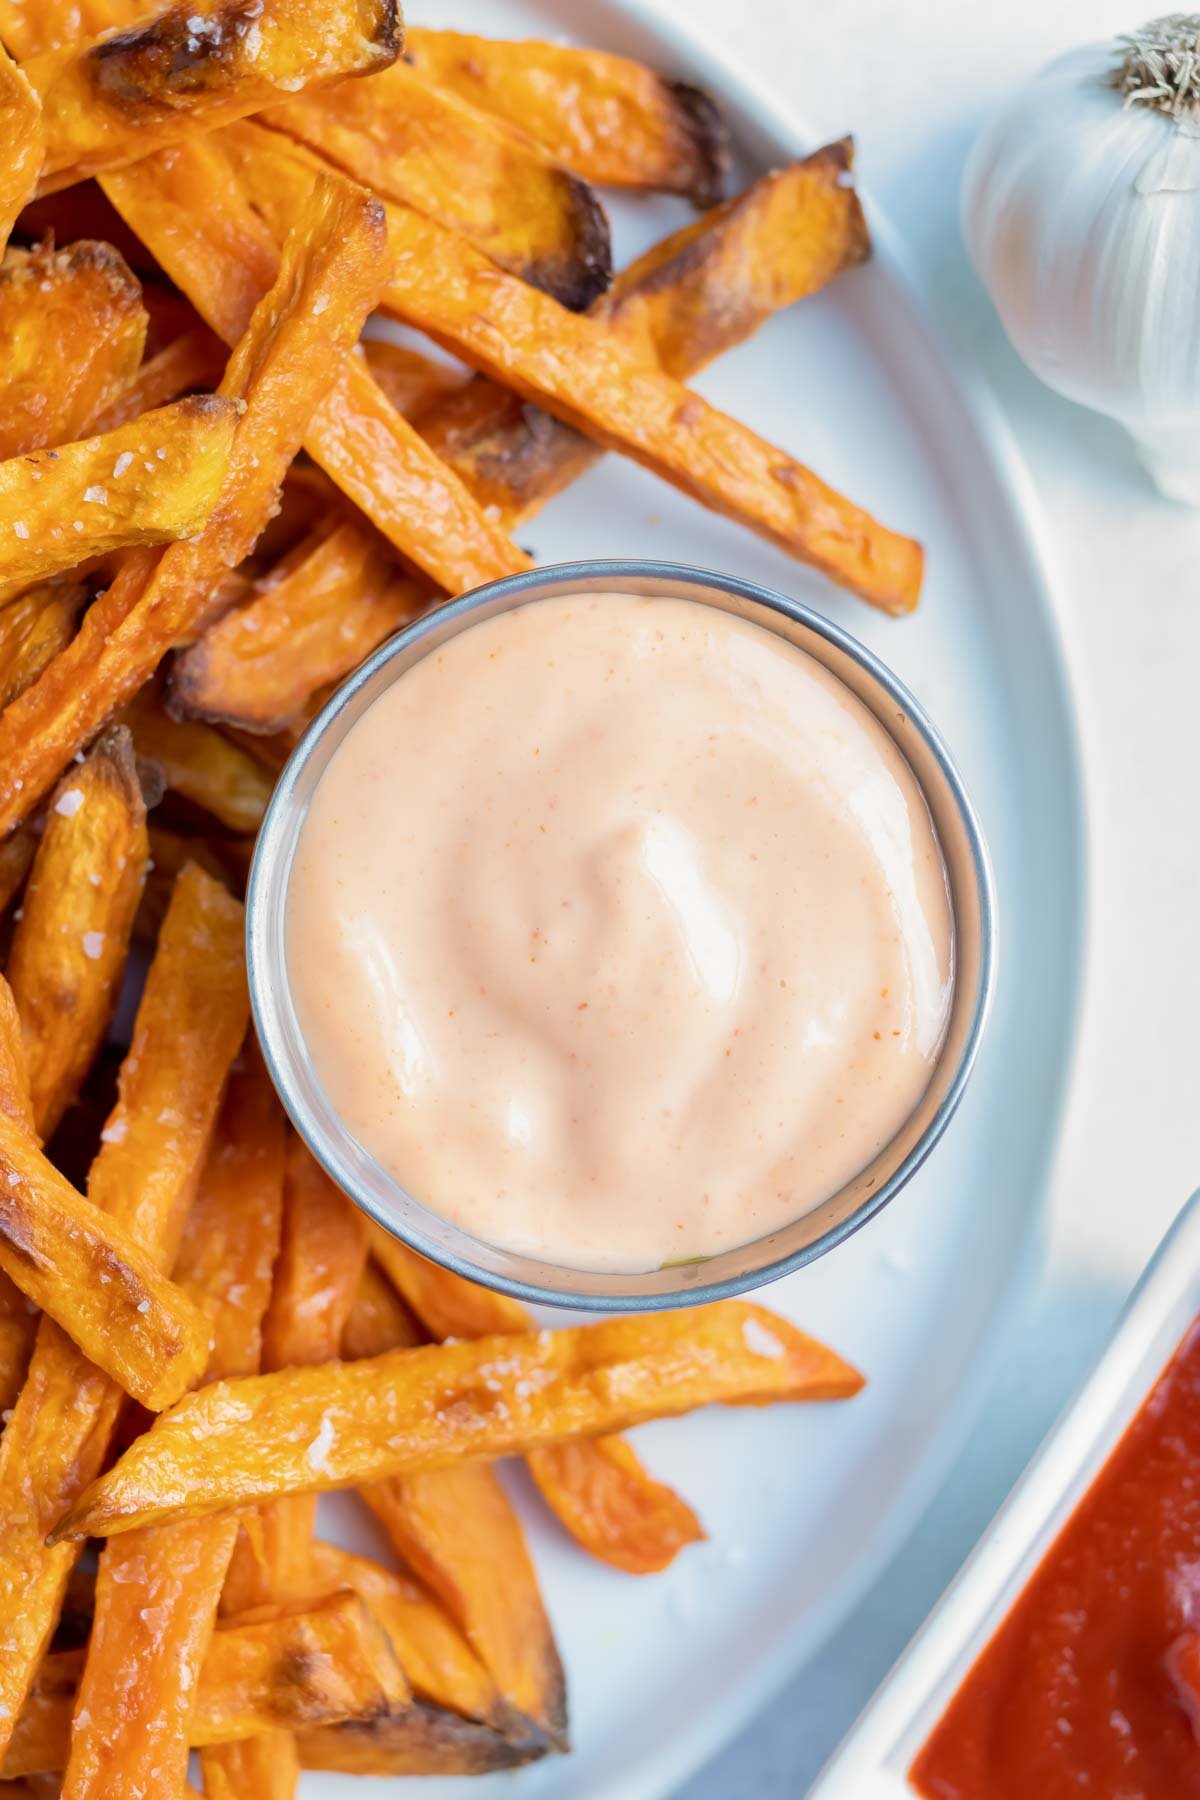 Sriracha Mayo is a homemade, spicy dip perfect for adding to appetizers, lunch, or dinner.